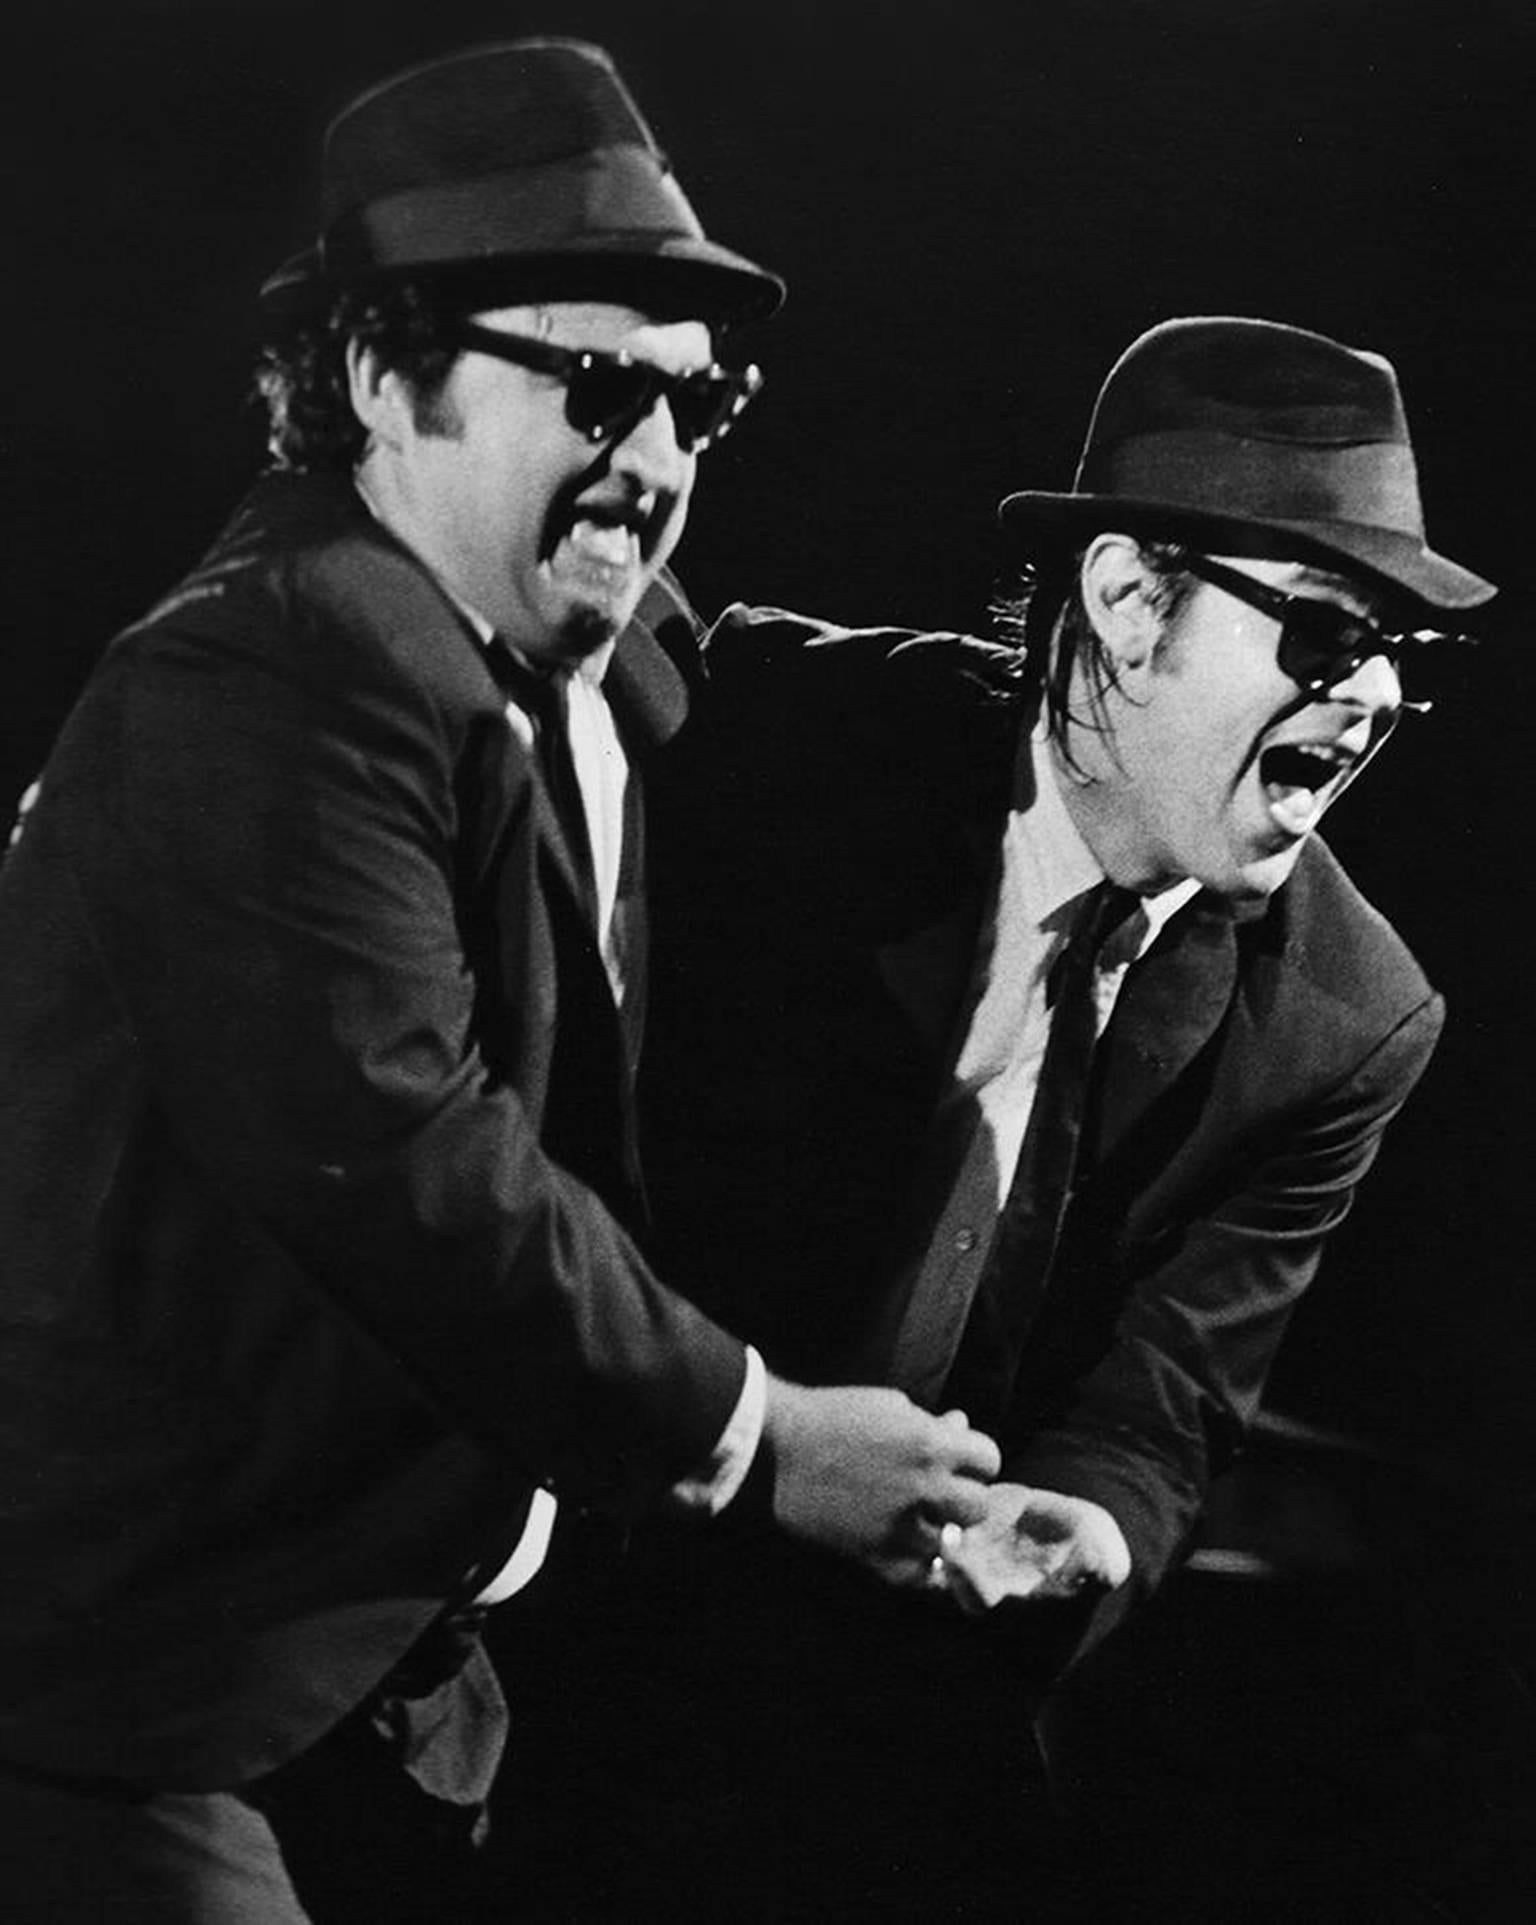 Jay Dickman Black and White Photograph - Jake and Elwood, the Blues Brothers in Dallas